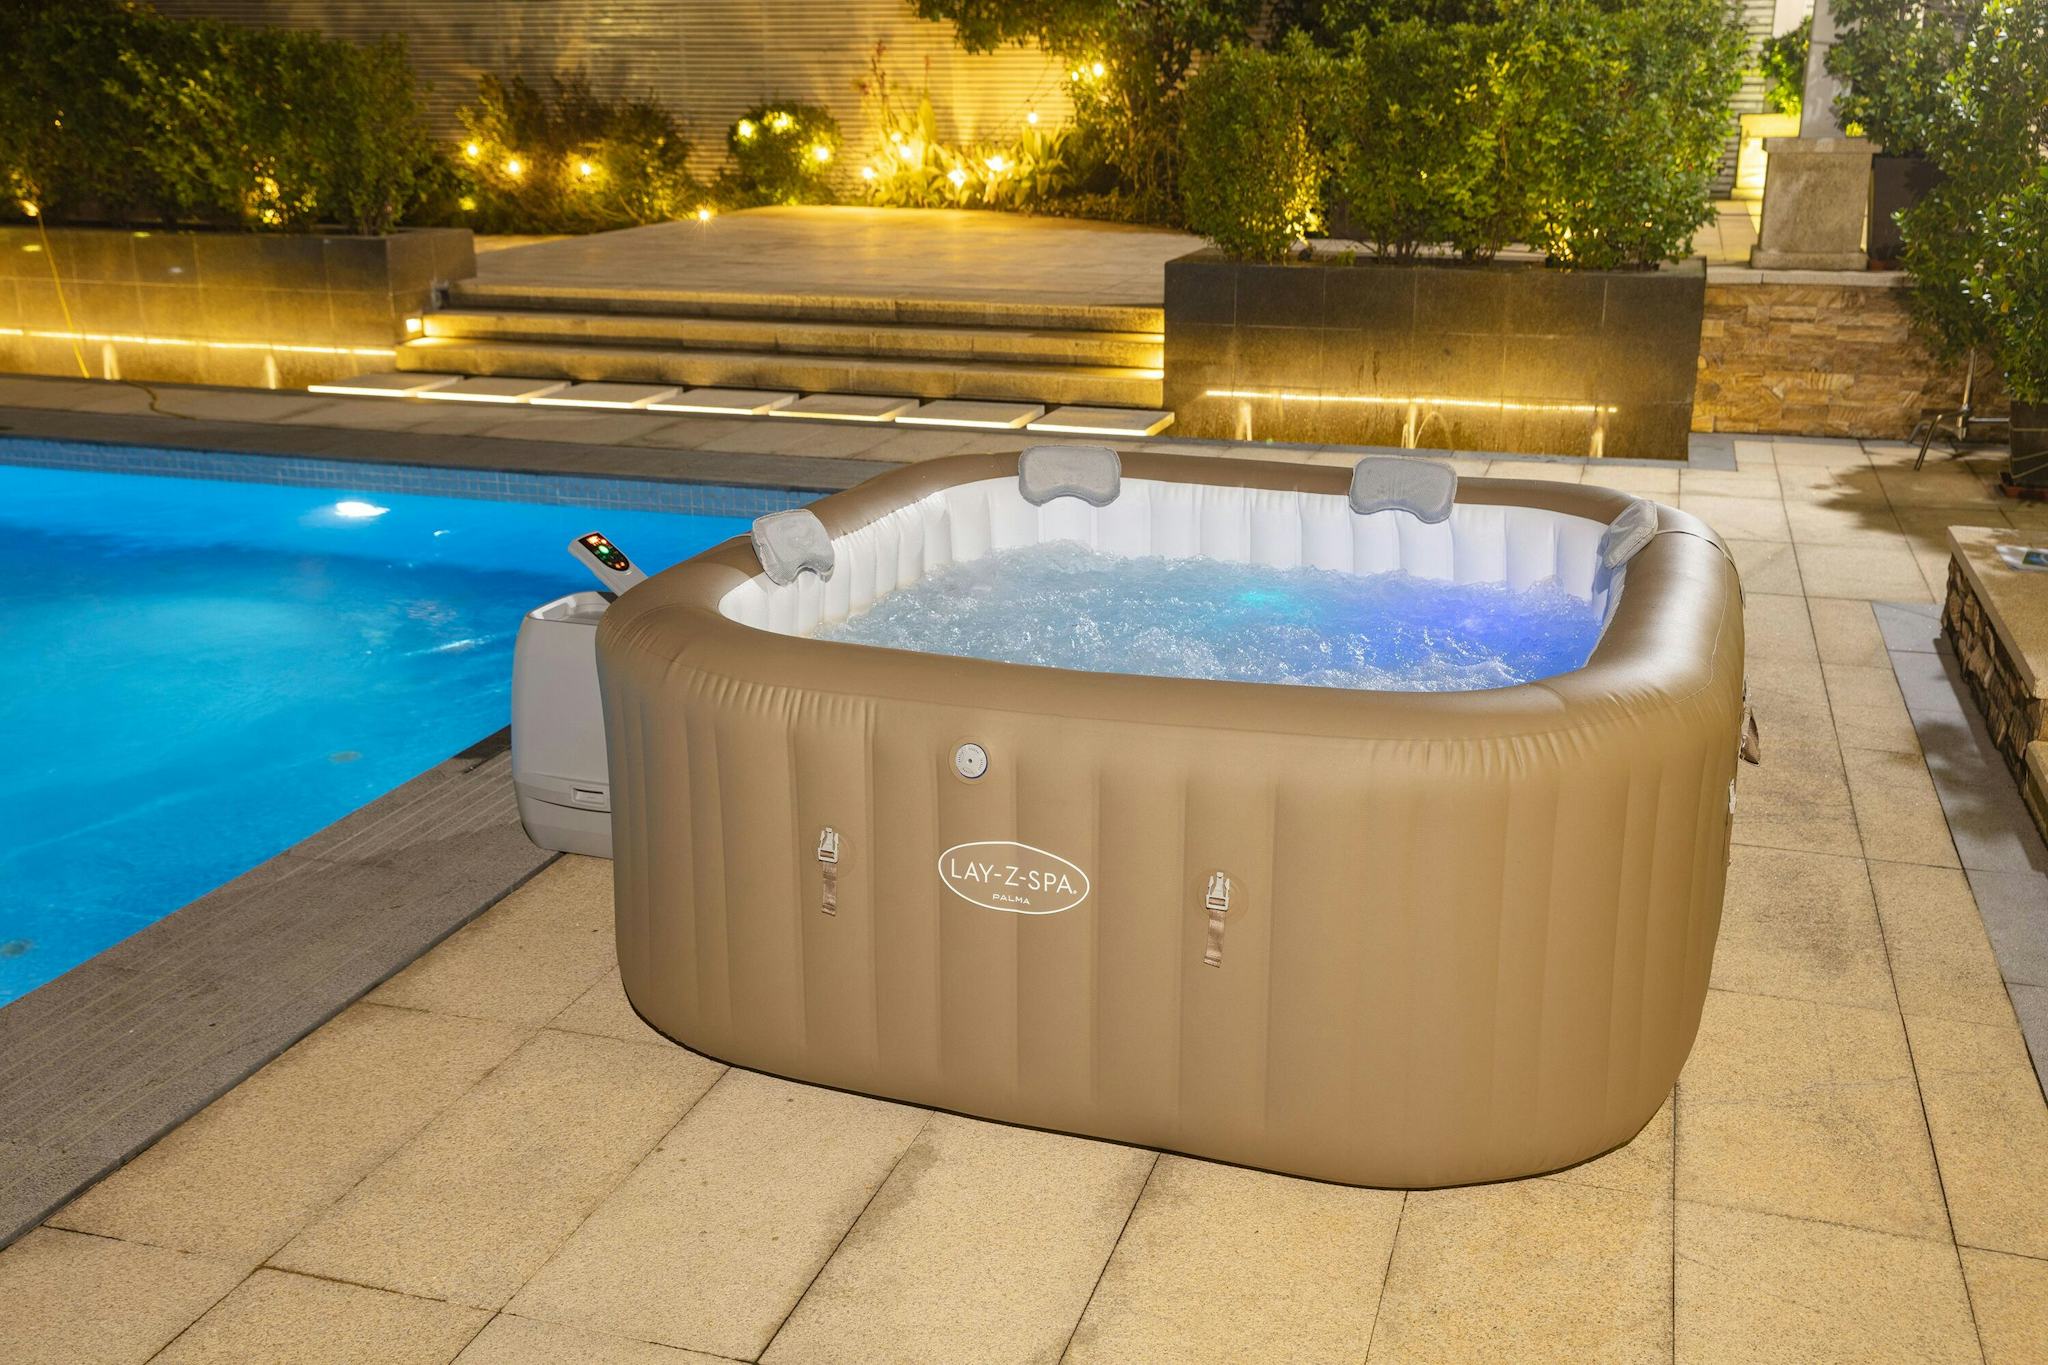 Spas Gonflables Spa gonflable carré Lay-Z-Spa® Palma Hydrojet Pro™ 5 - 7 places Bestway 7